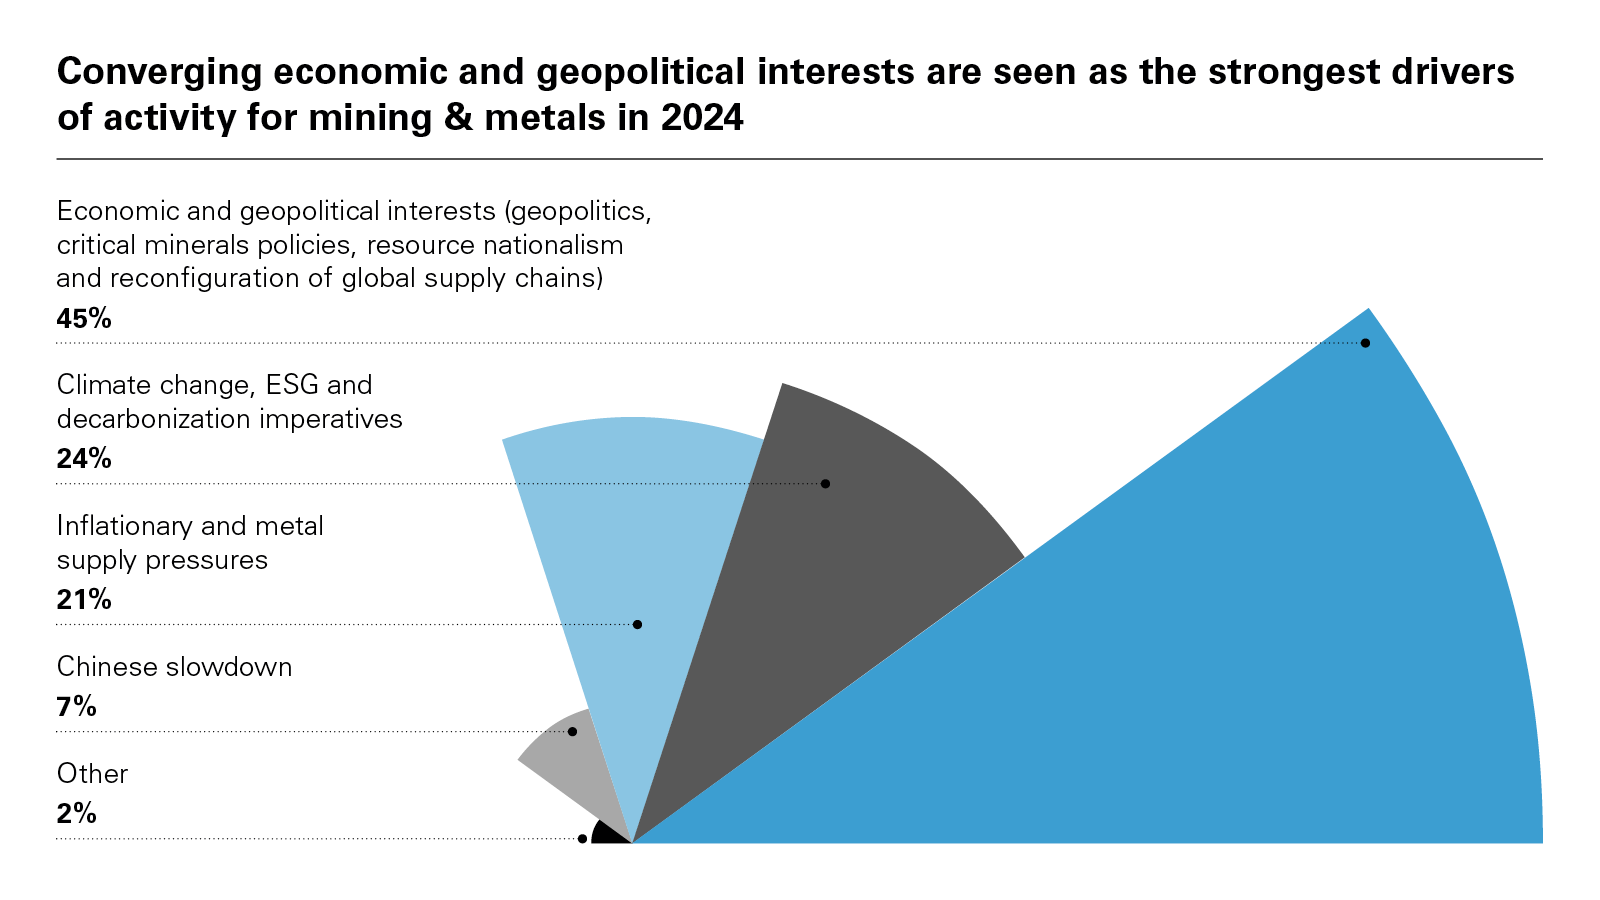 Converging economic and geopolitical interests are seen as the strongest drivers of activity for mining & metals in 2024